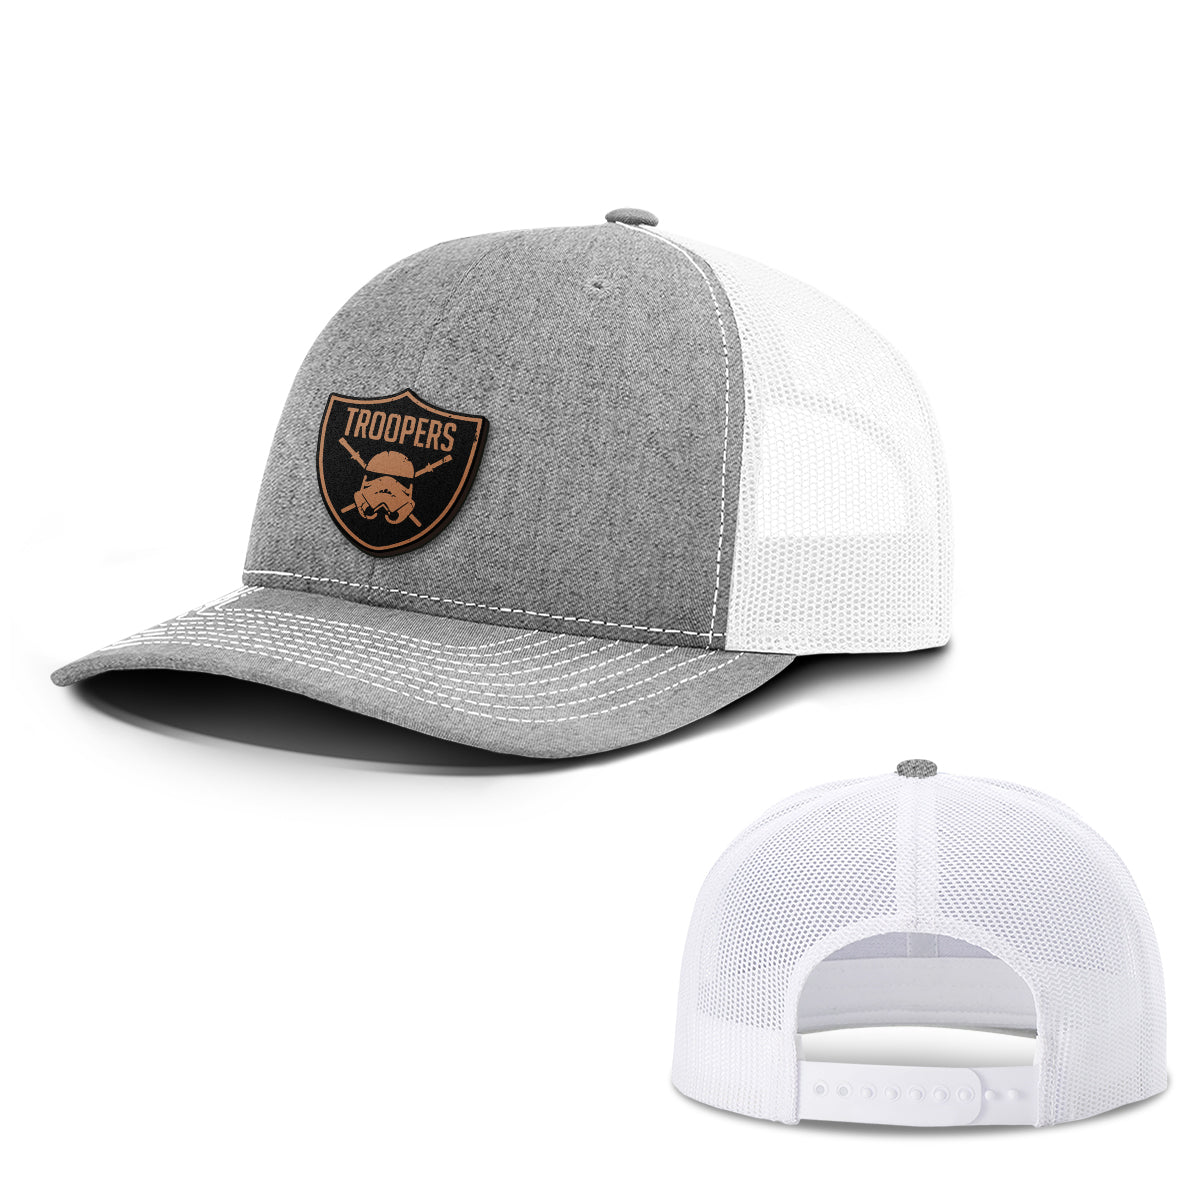 Troopers Leather Patch Hats - BustedTees.com